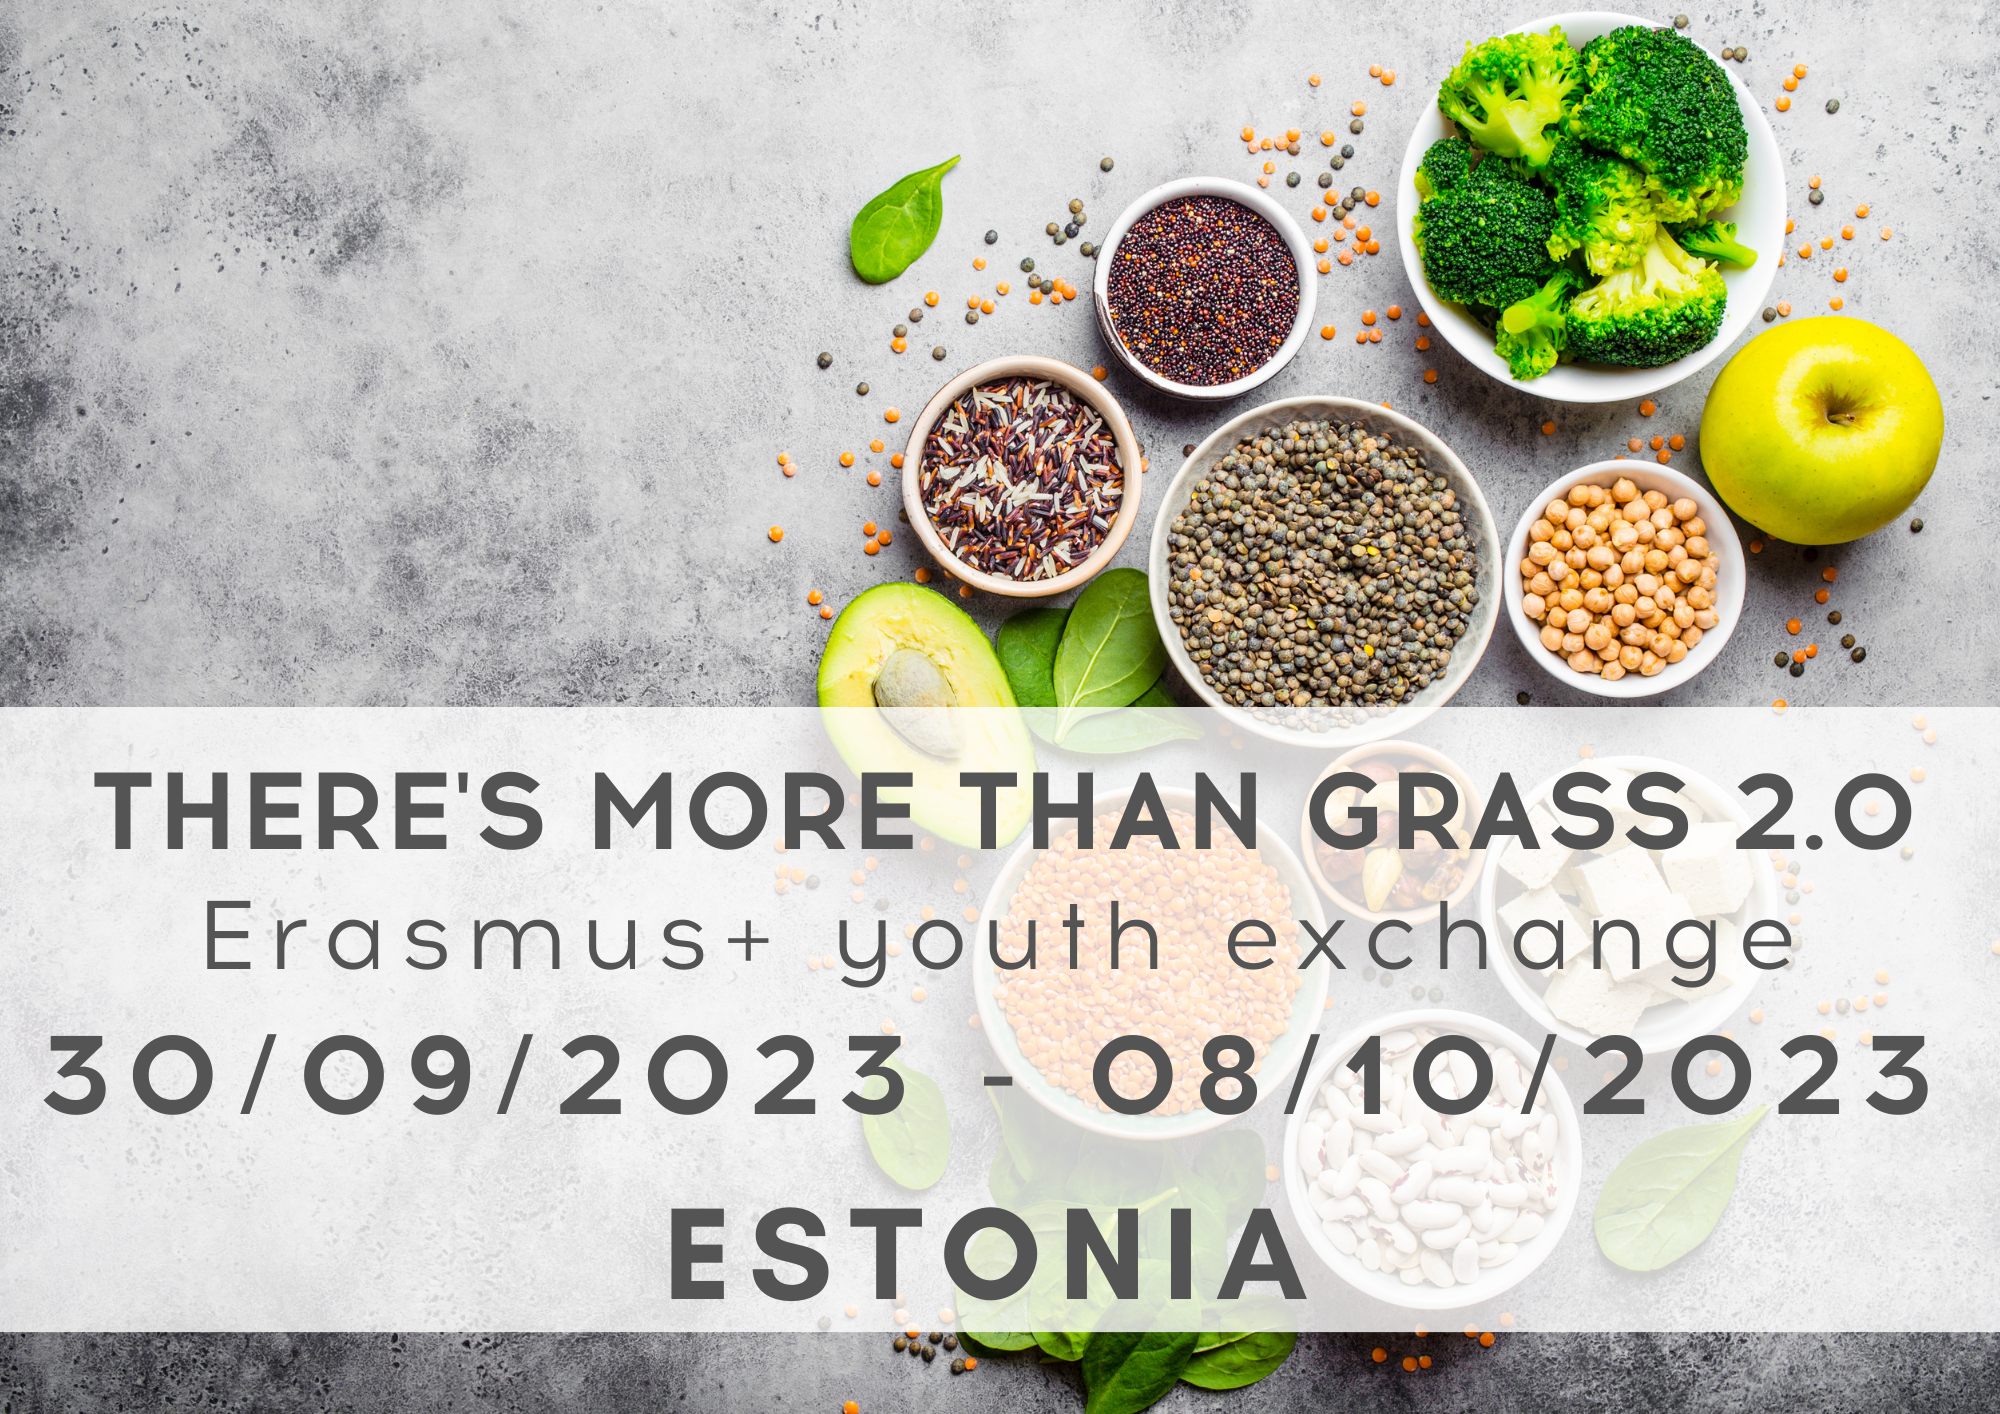 Erasmus+ Youth Exchange "There's More Than Grass 2.0" in Estonia. 30/09-08/10/2023